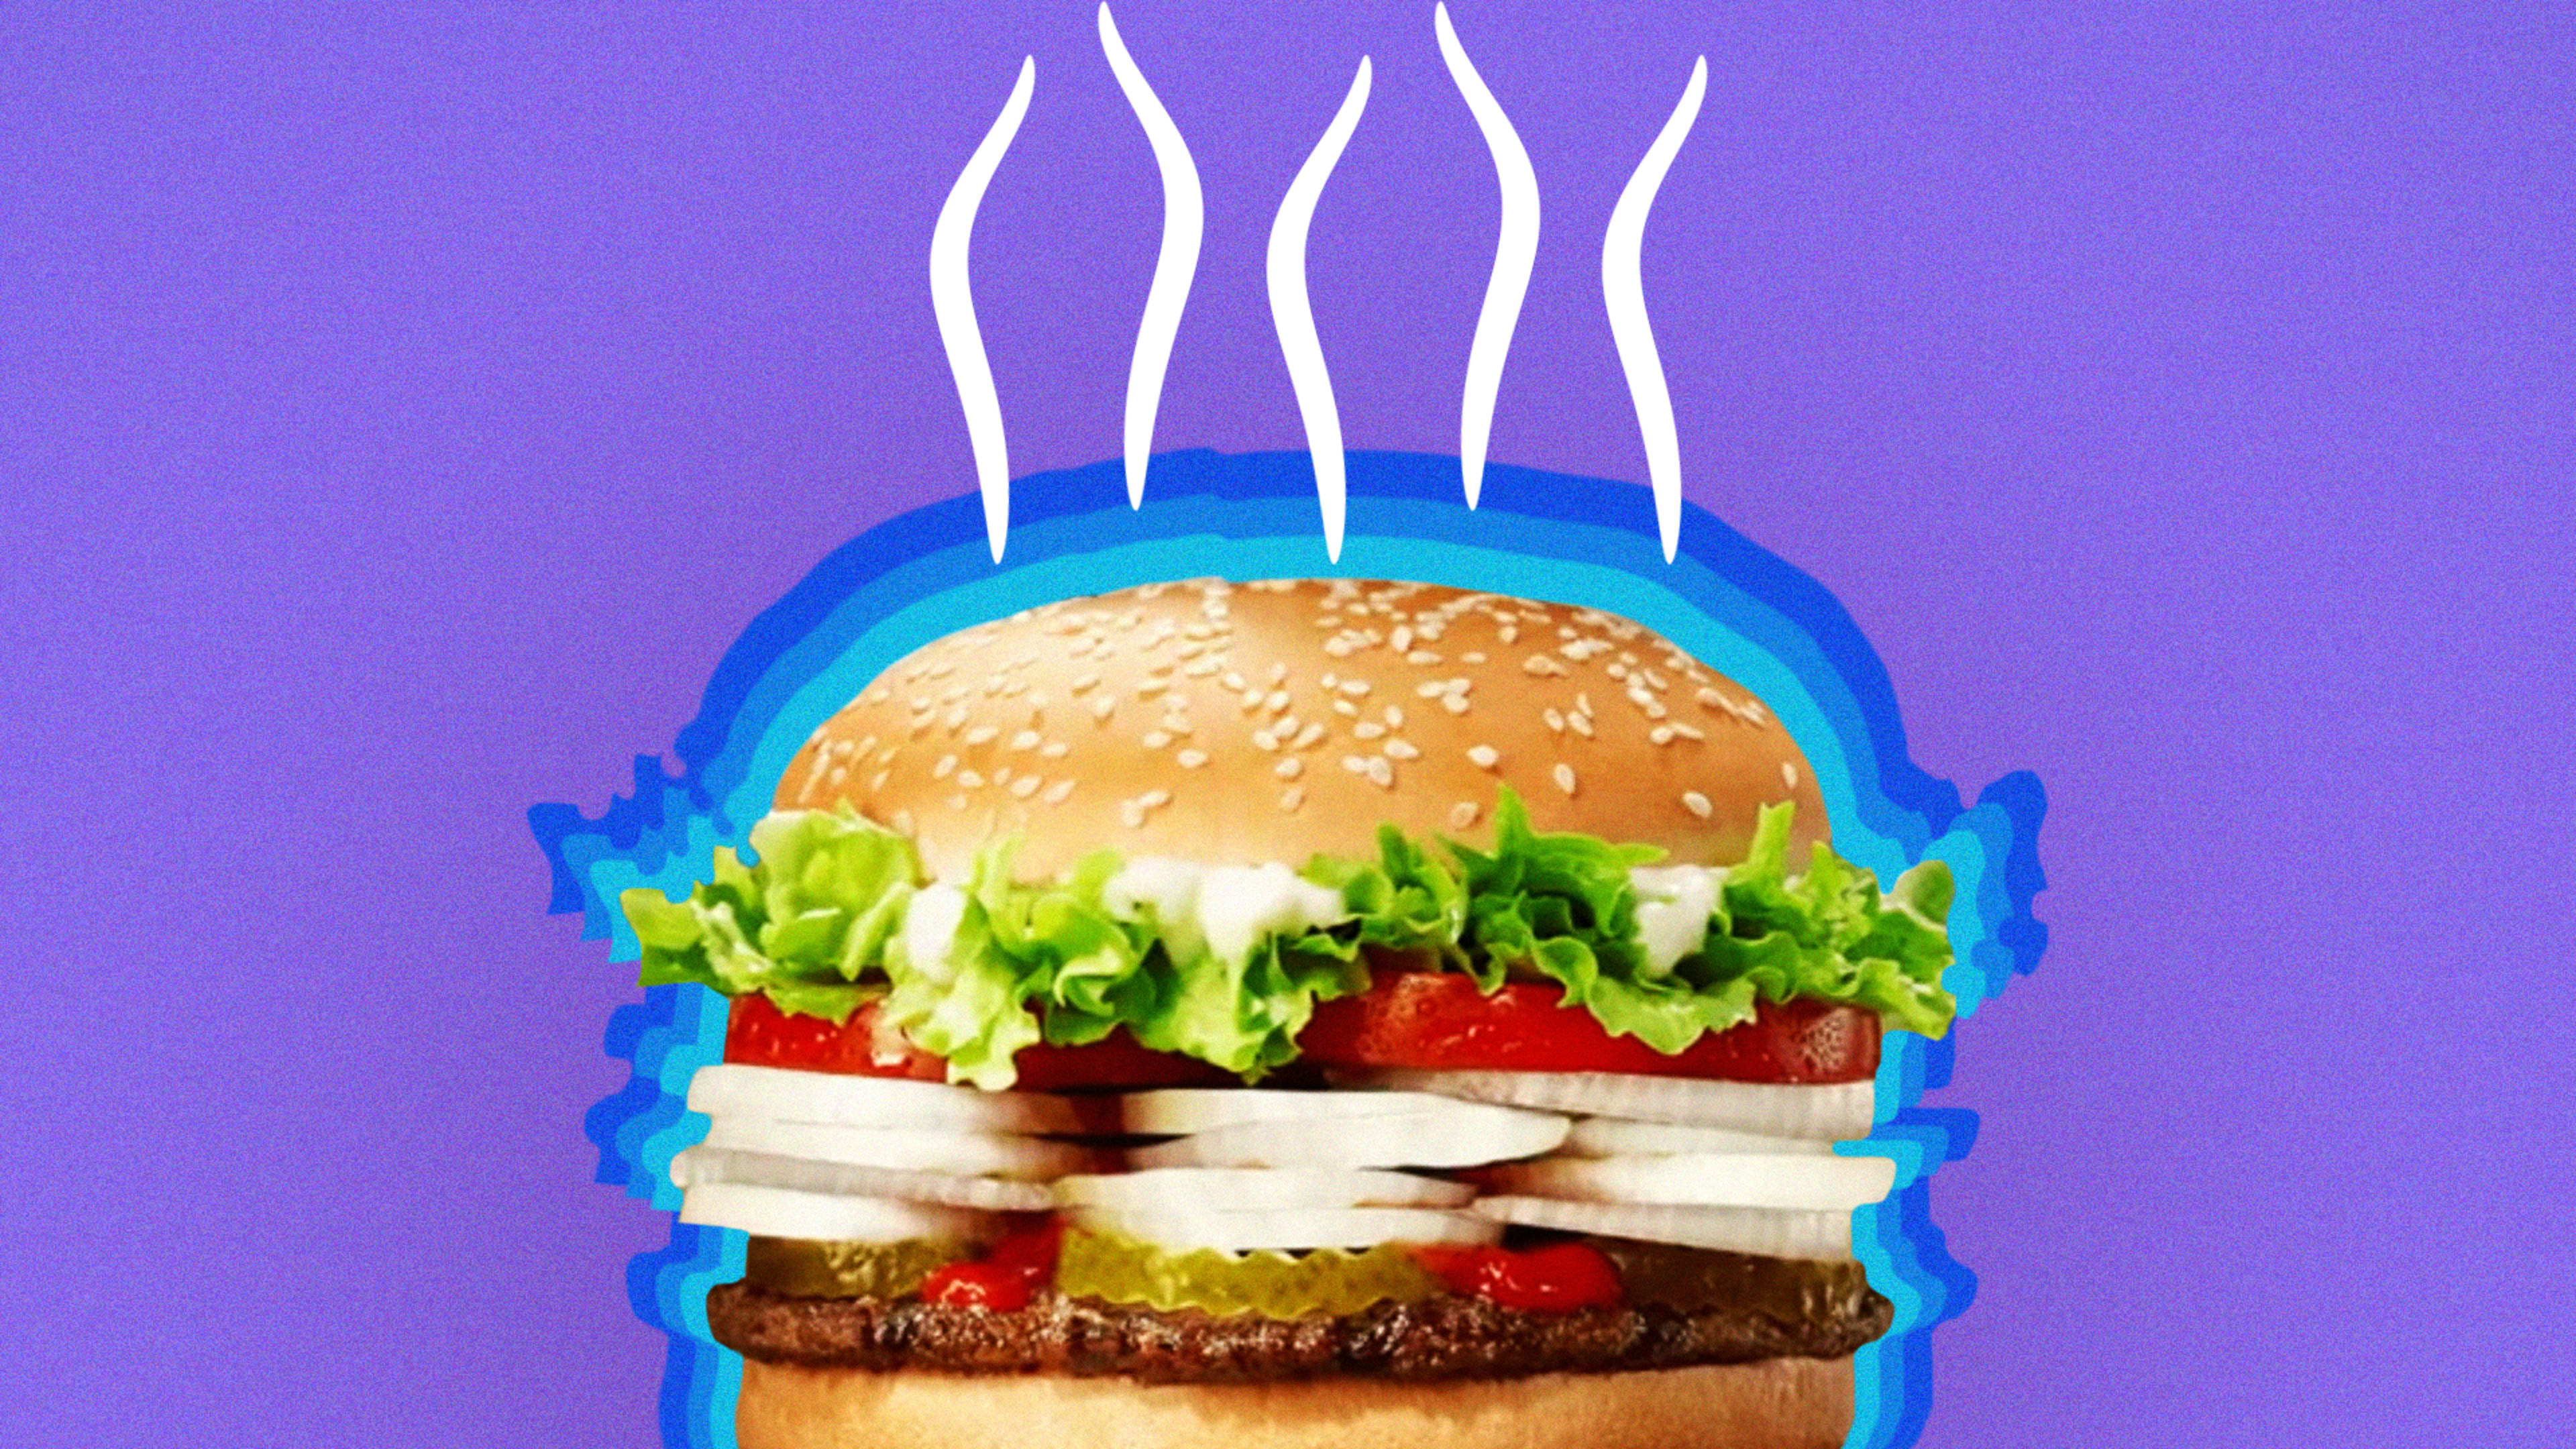 Burger King uses extra onions to equip The Whopper for social distancing